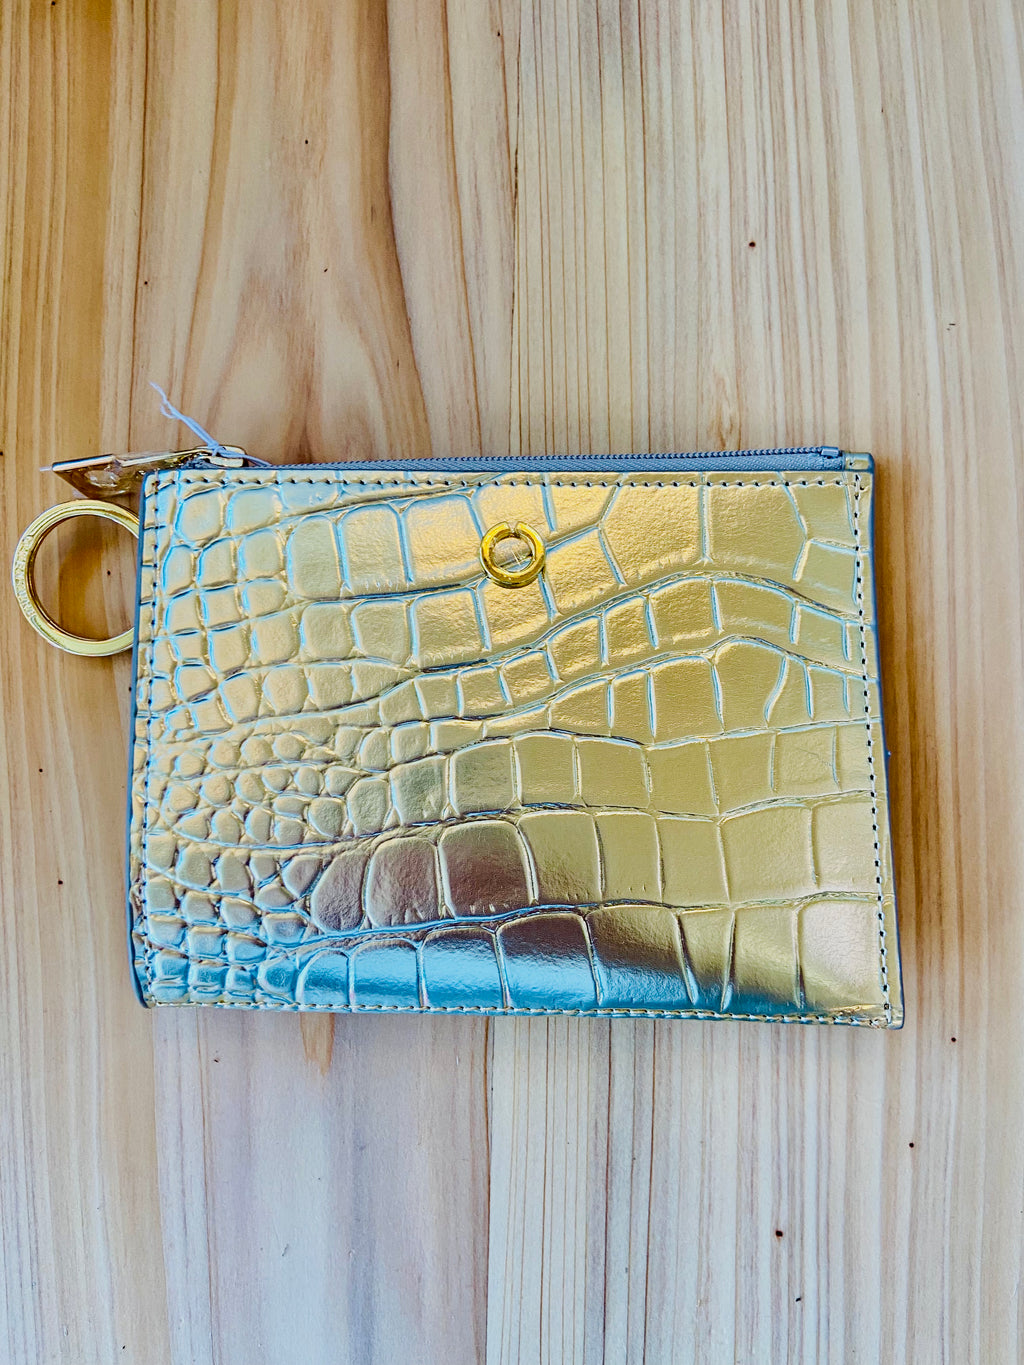 Leather Big O® Key Ring - Solid Gold Rush Croc-Embossed